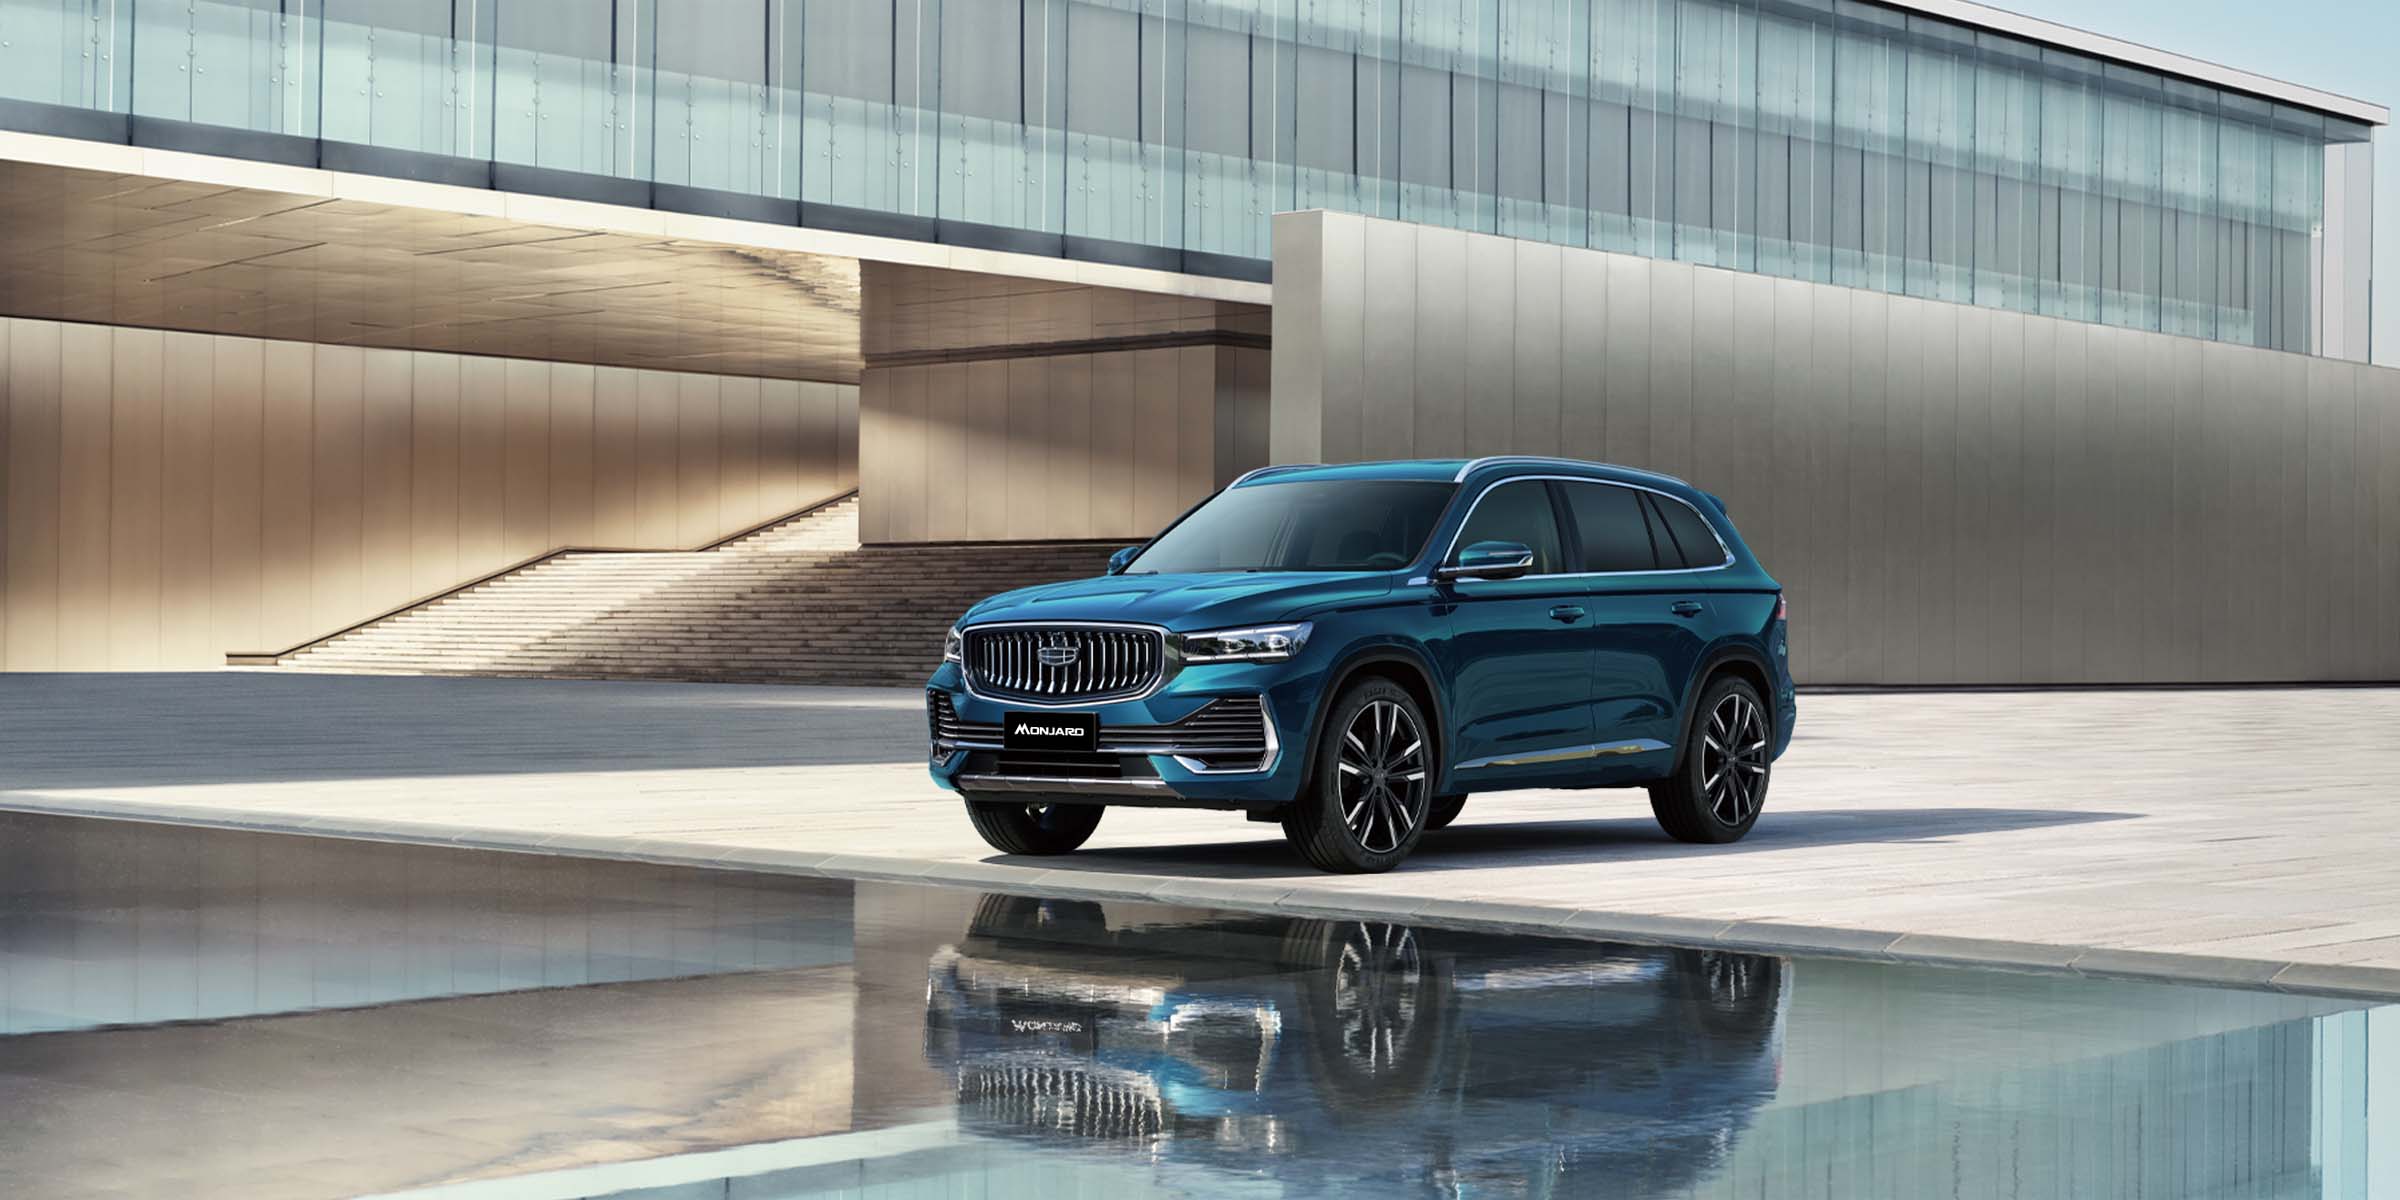 The Hongqi H6 Sedan Is Heading To Global Markets With A 2.0-Liter